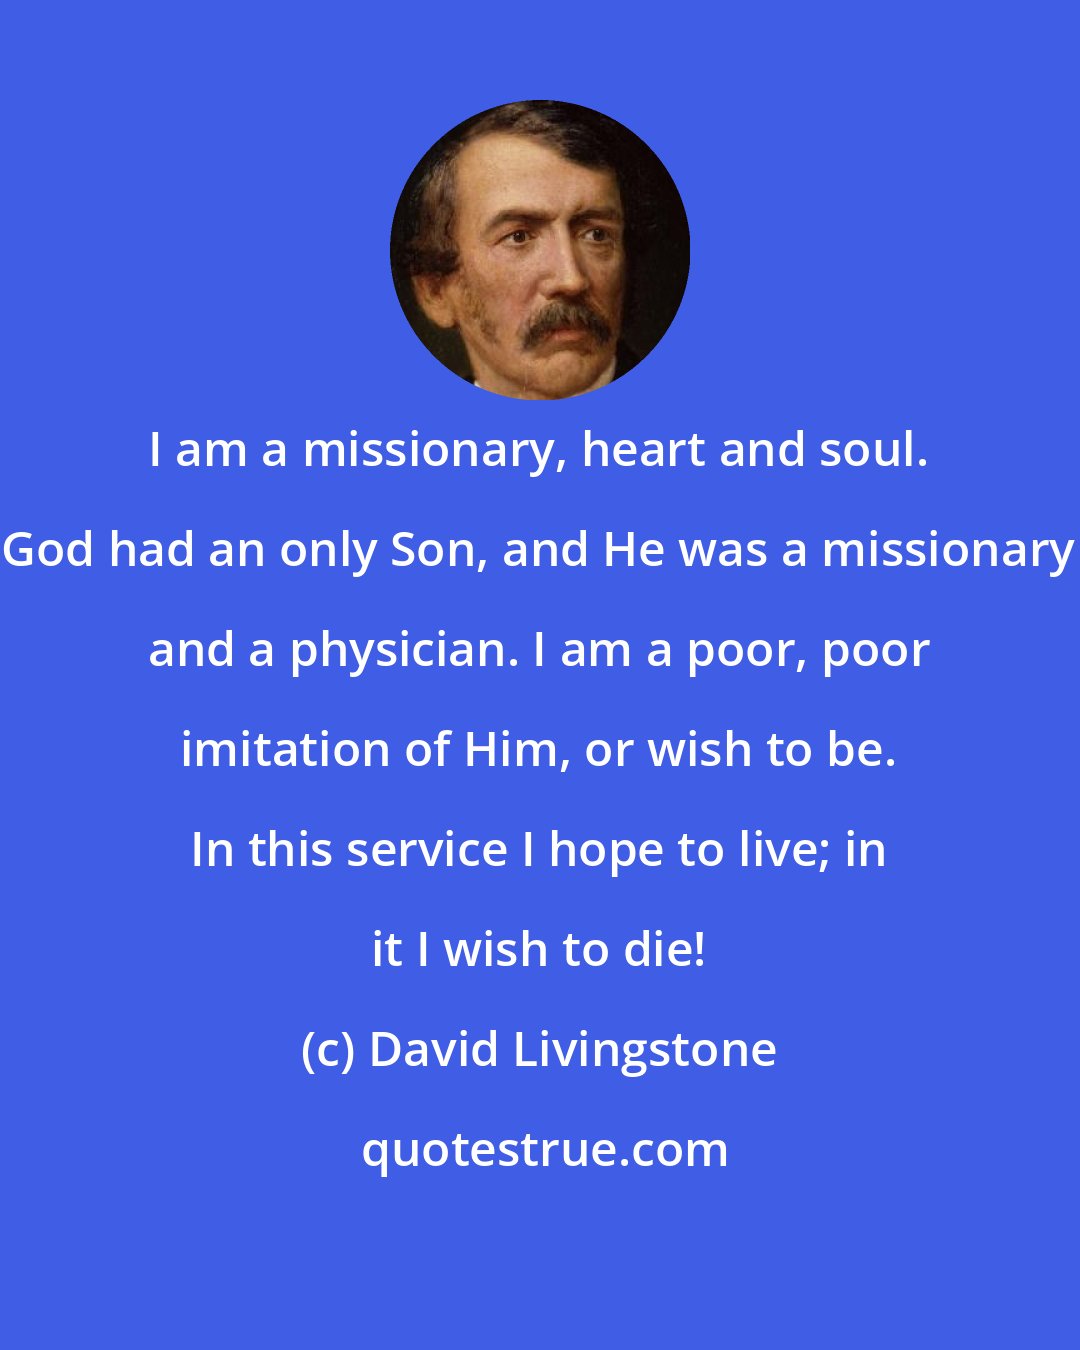 David Livingstone: I am a missionary, heart and soul. God had an only Son, and He was a missionary and a physician. I am a poor, poor imitation of Him, or wish to be. In this service I hope to live; in it I wish to die!